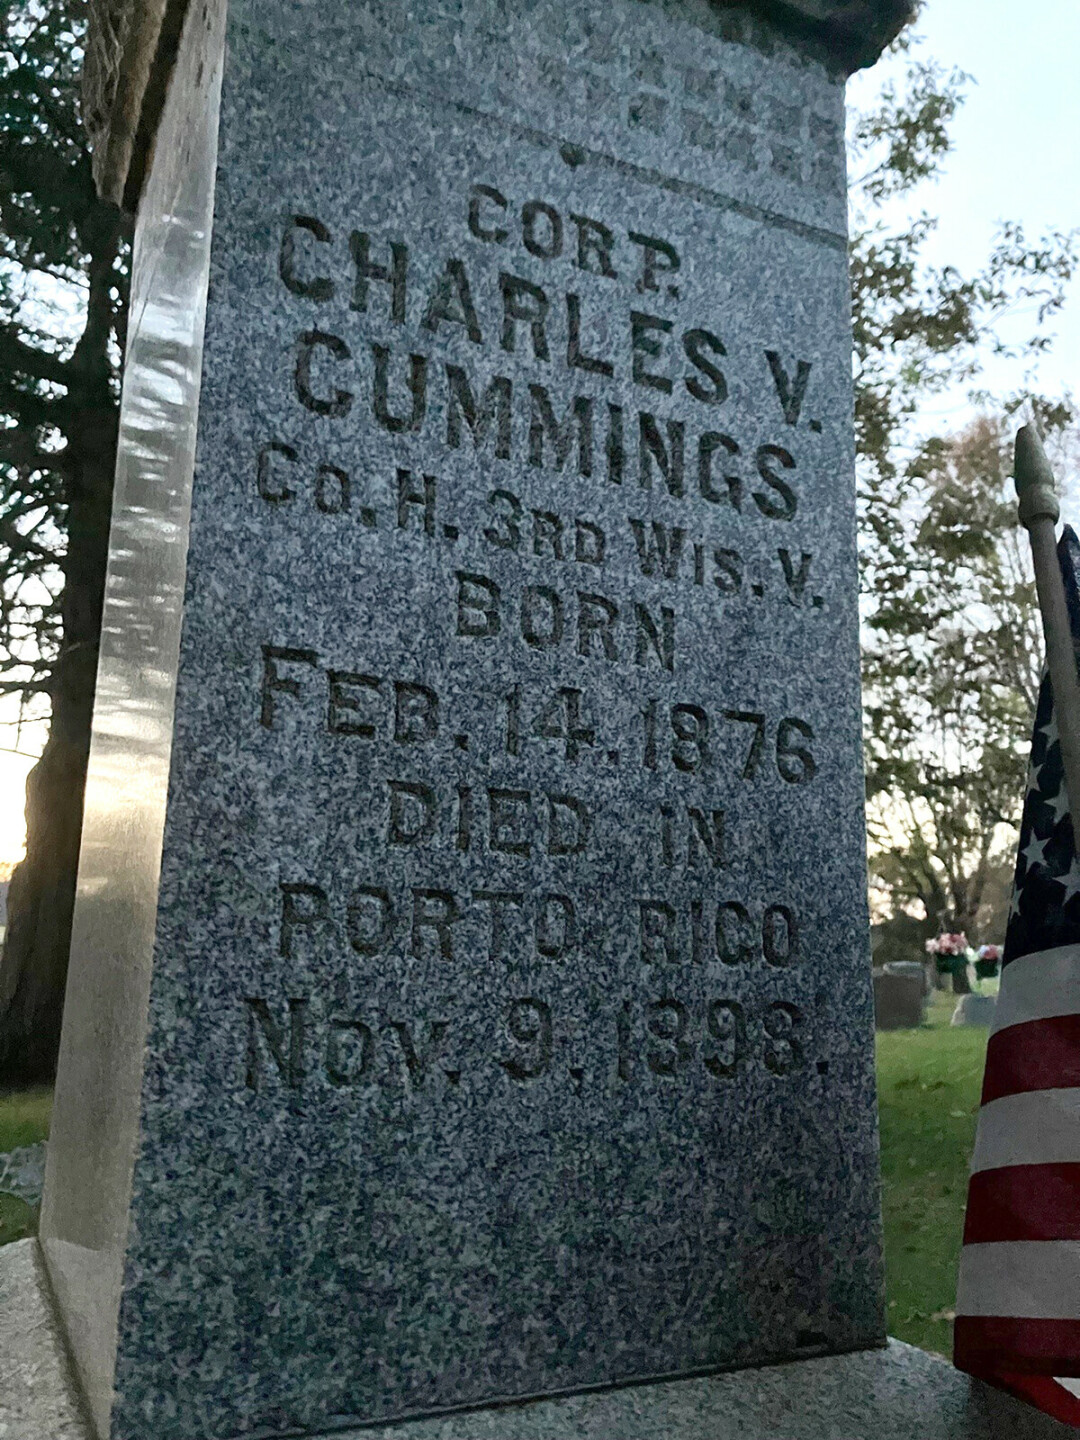 Cpl. Charles V. Cummings is buried in the Forest Center Cemetery in the town of Spring Brook, southeast of Menomonie. (Submitted photo)